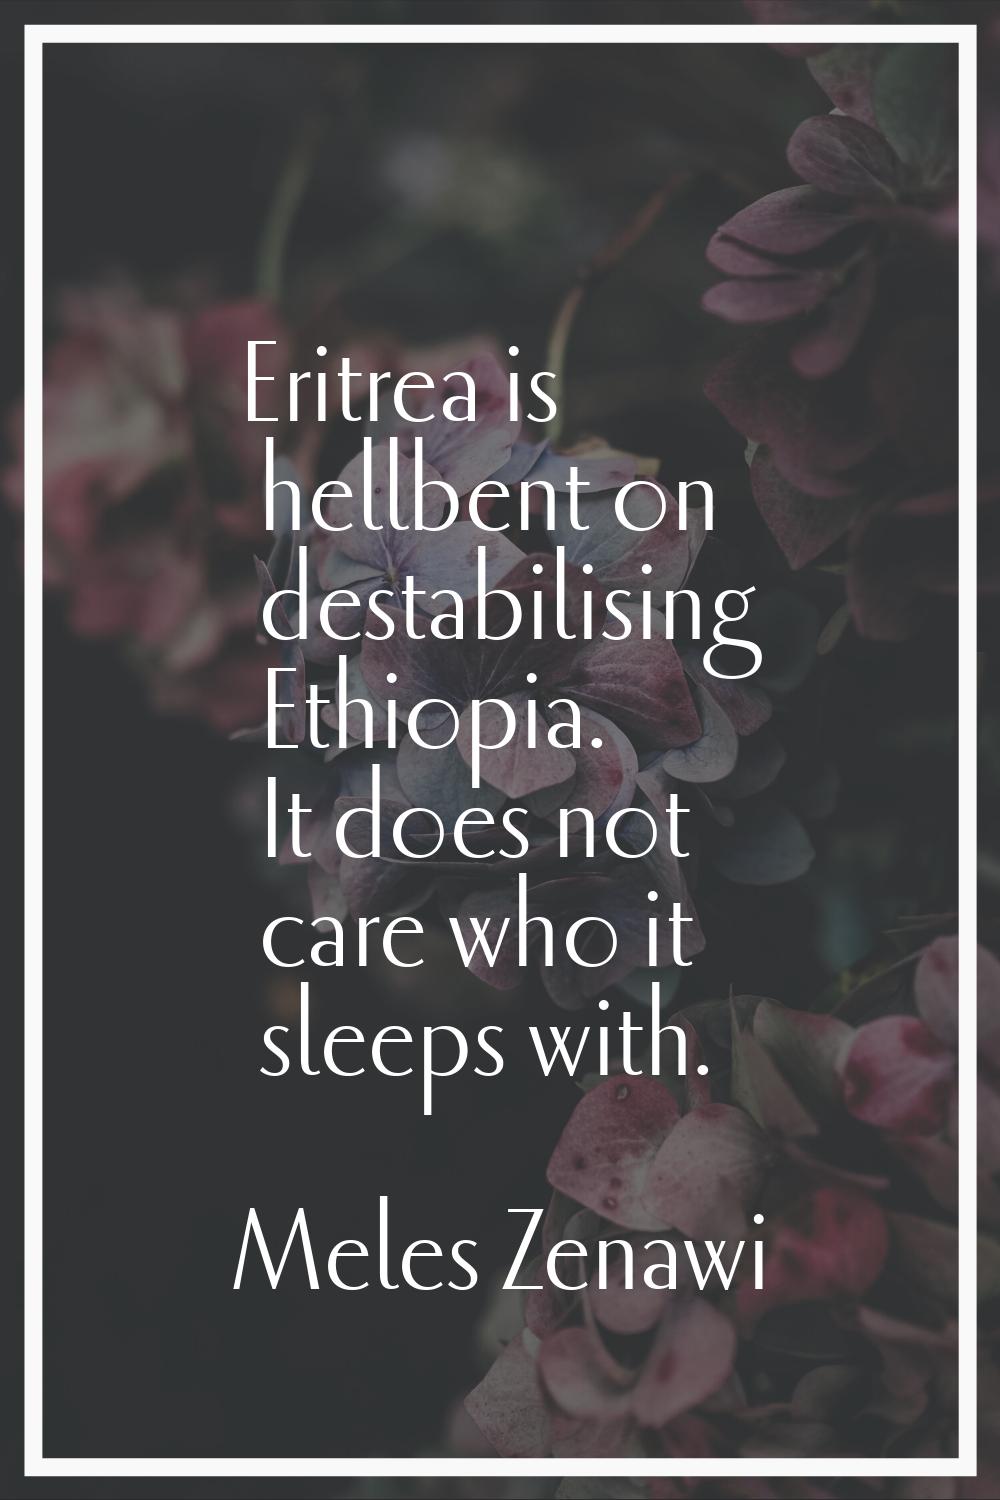 Eritrea is hellbent on destabilising Ethiopia. It does not care who it sleeps with.